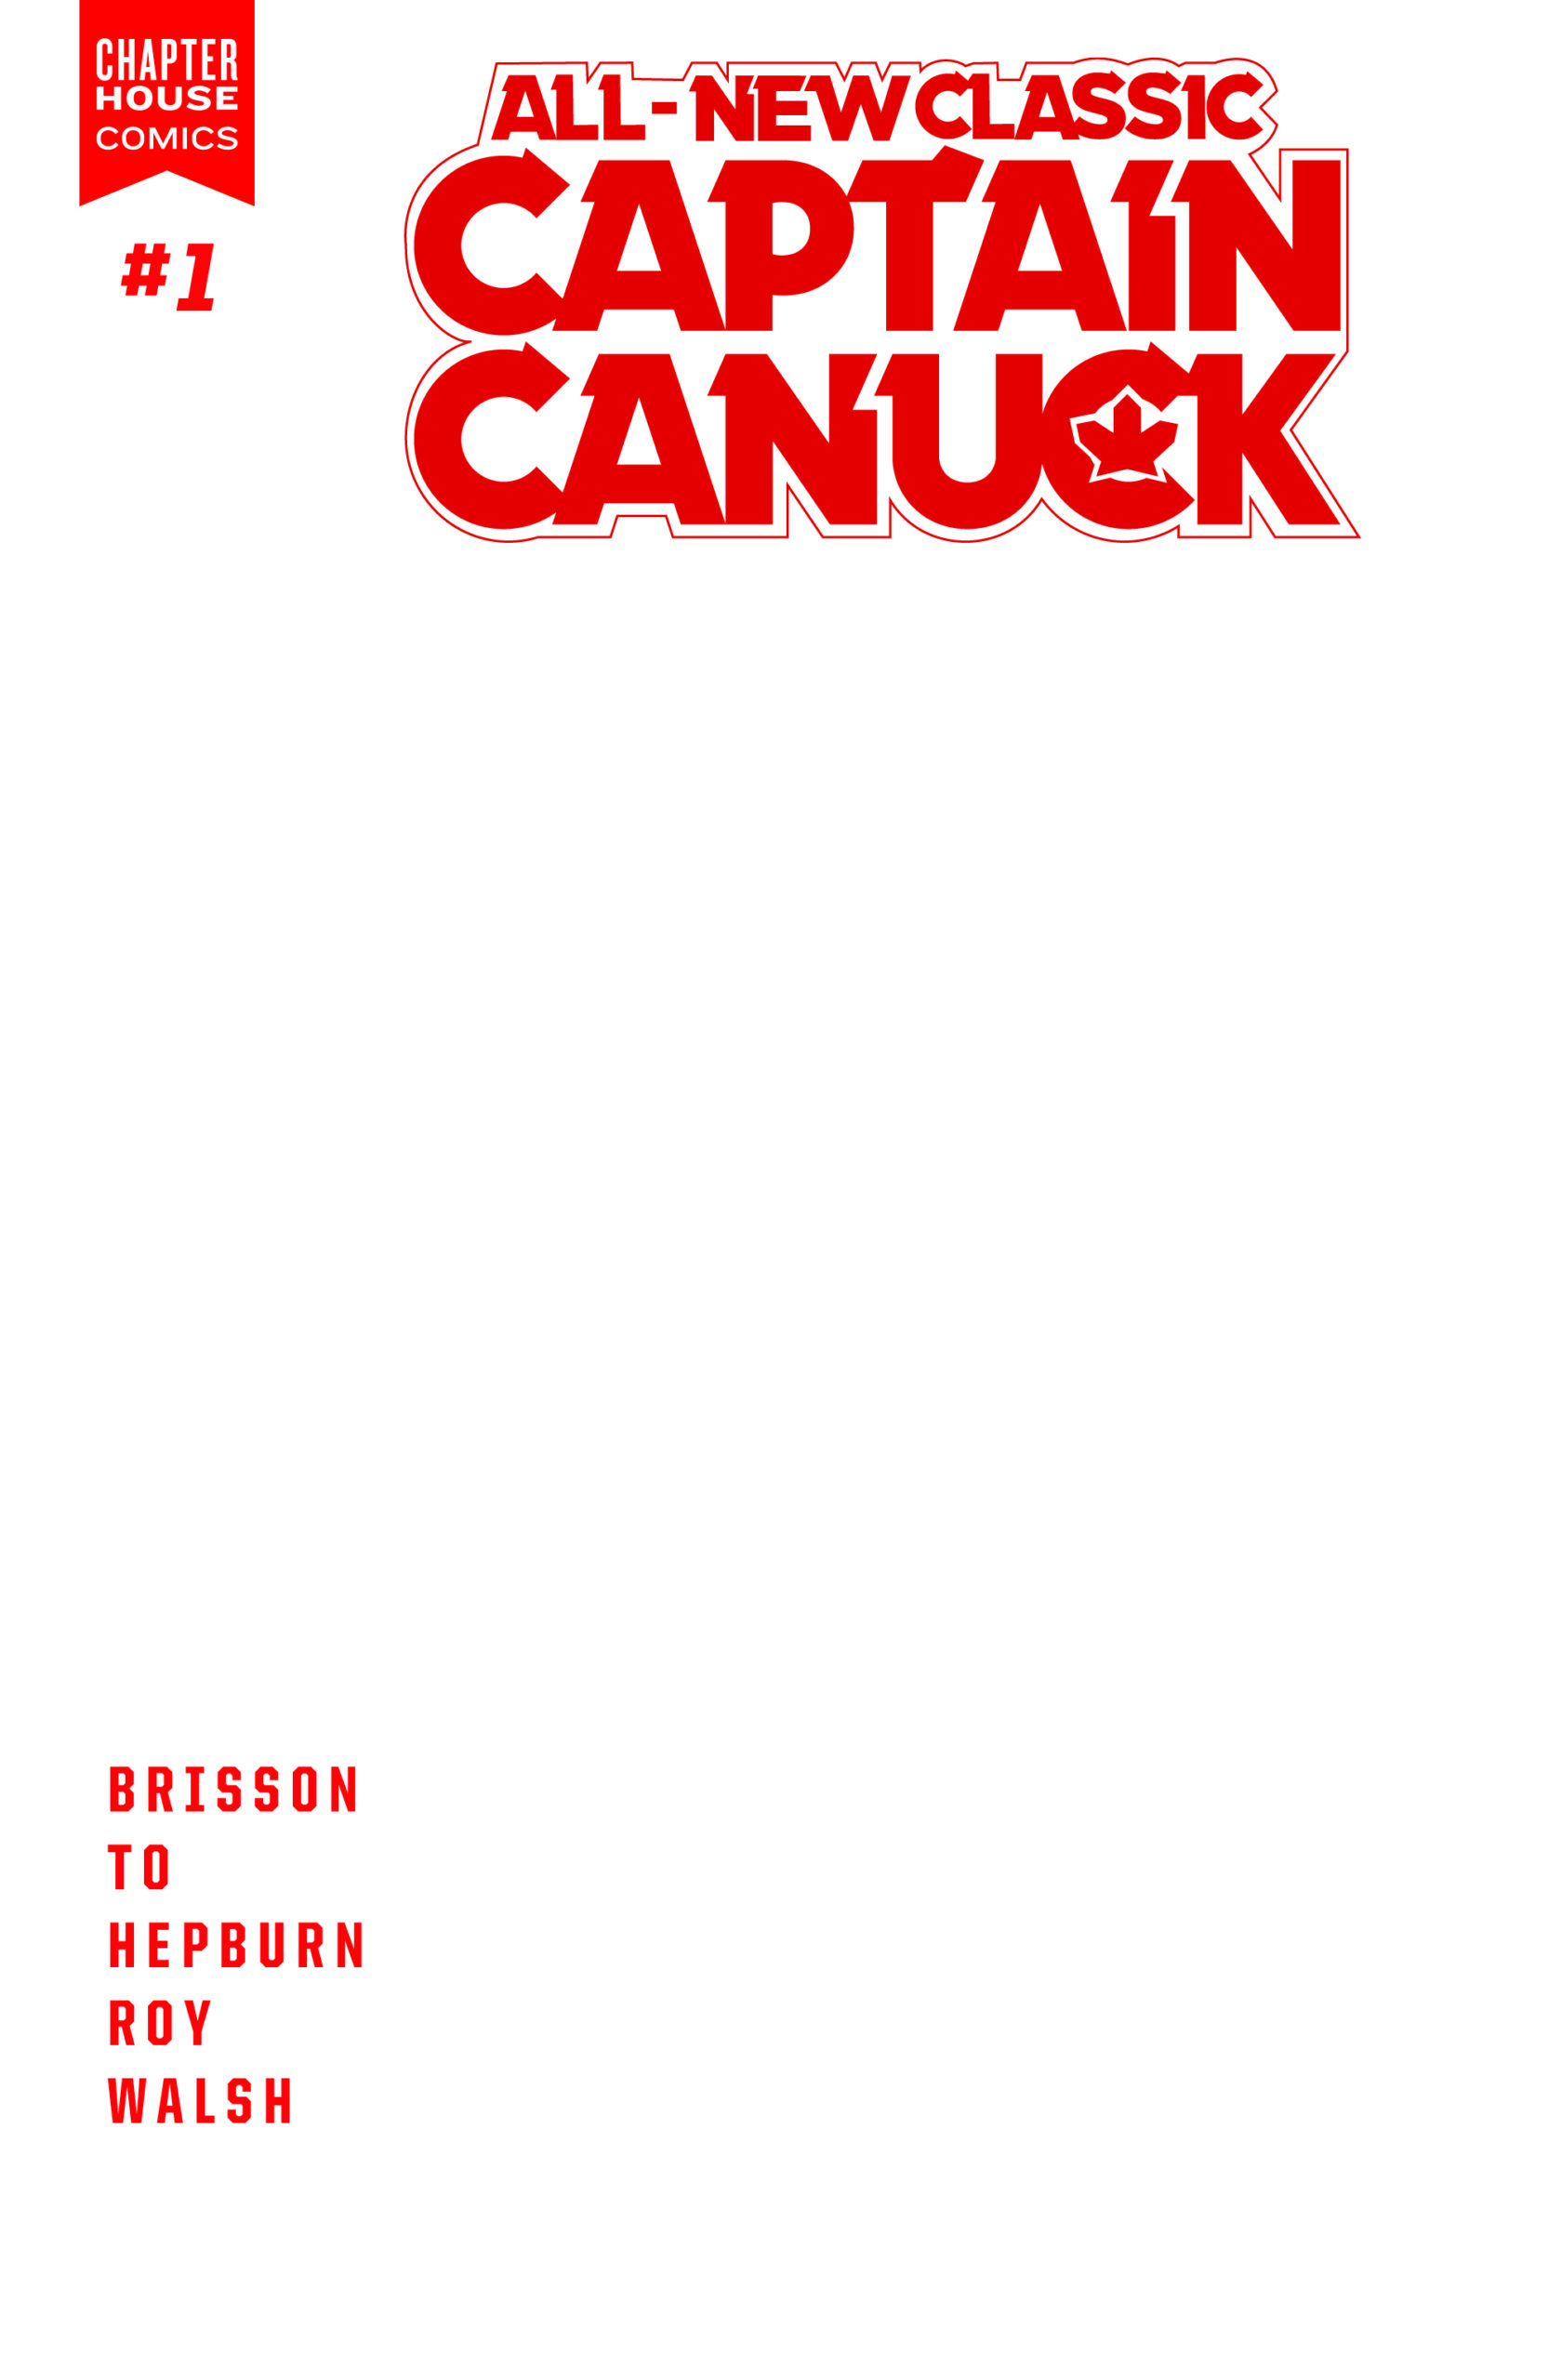 ALL NEW CLASSIC CAPTAIN CANUCK #1